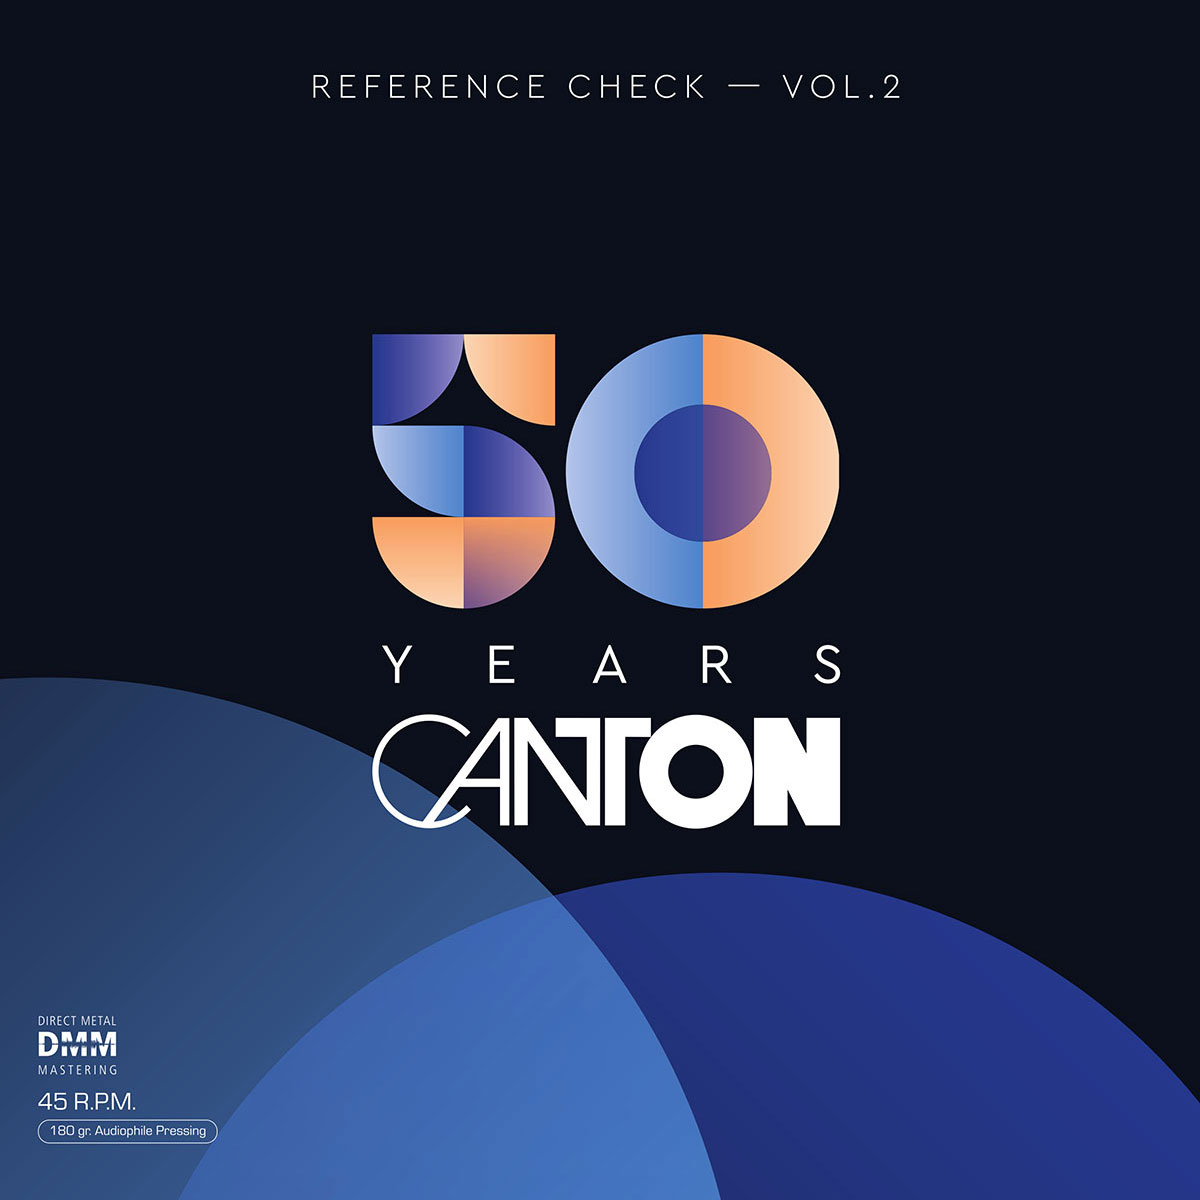 Canton Reference Check - Vol. 2